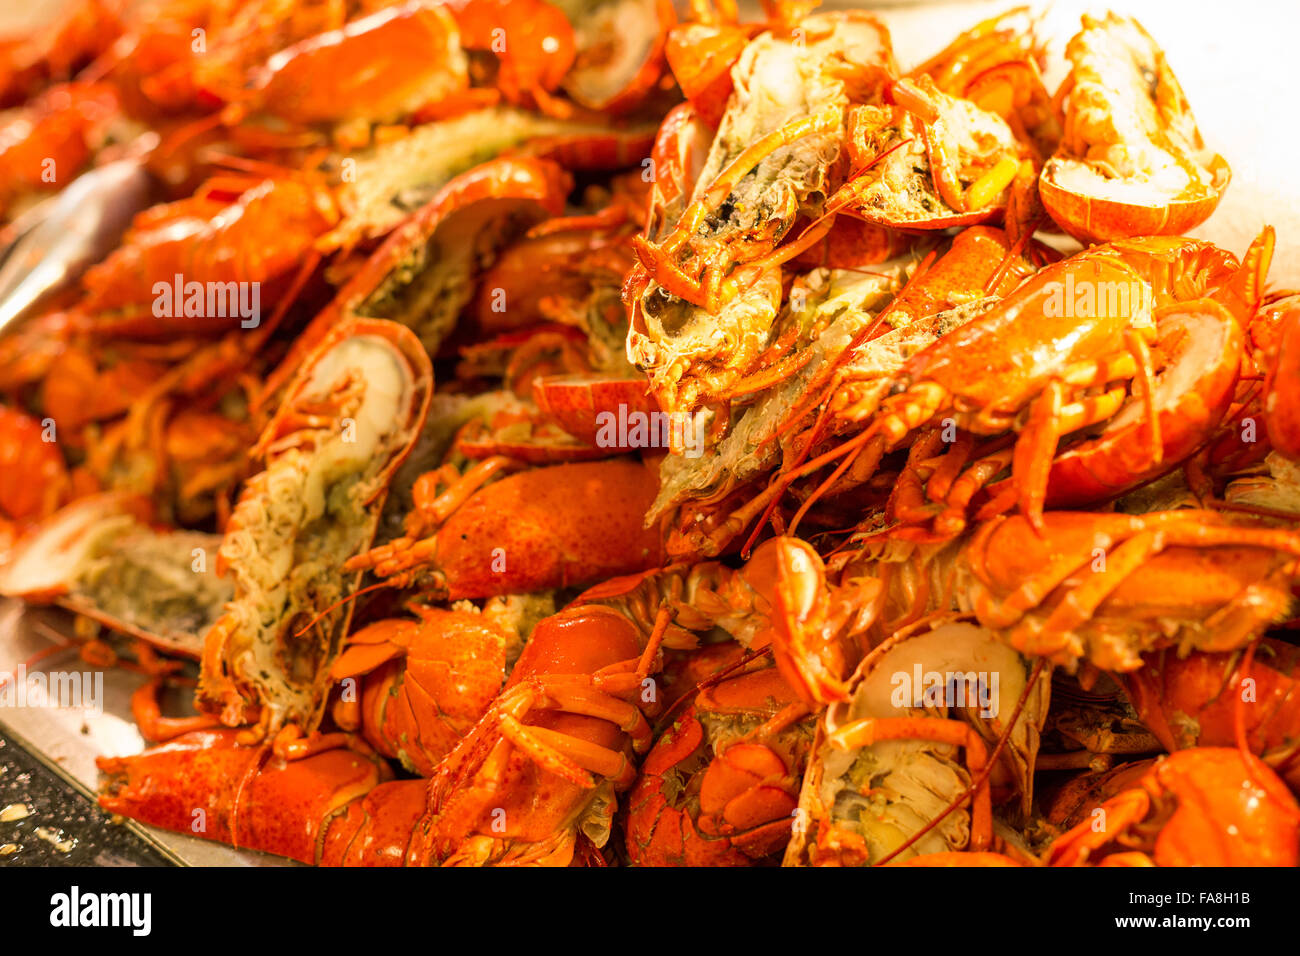 cooked lobster, seafood meal Stock Photo